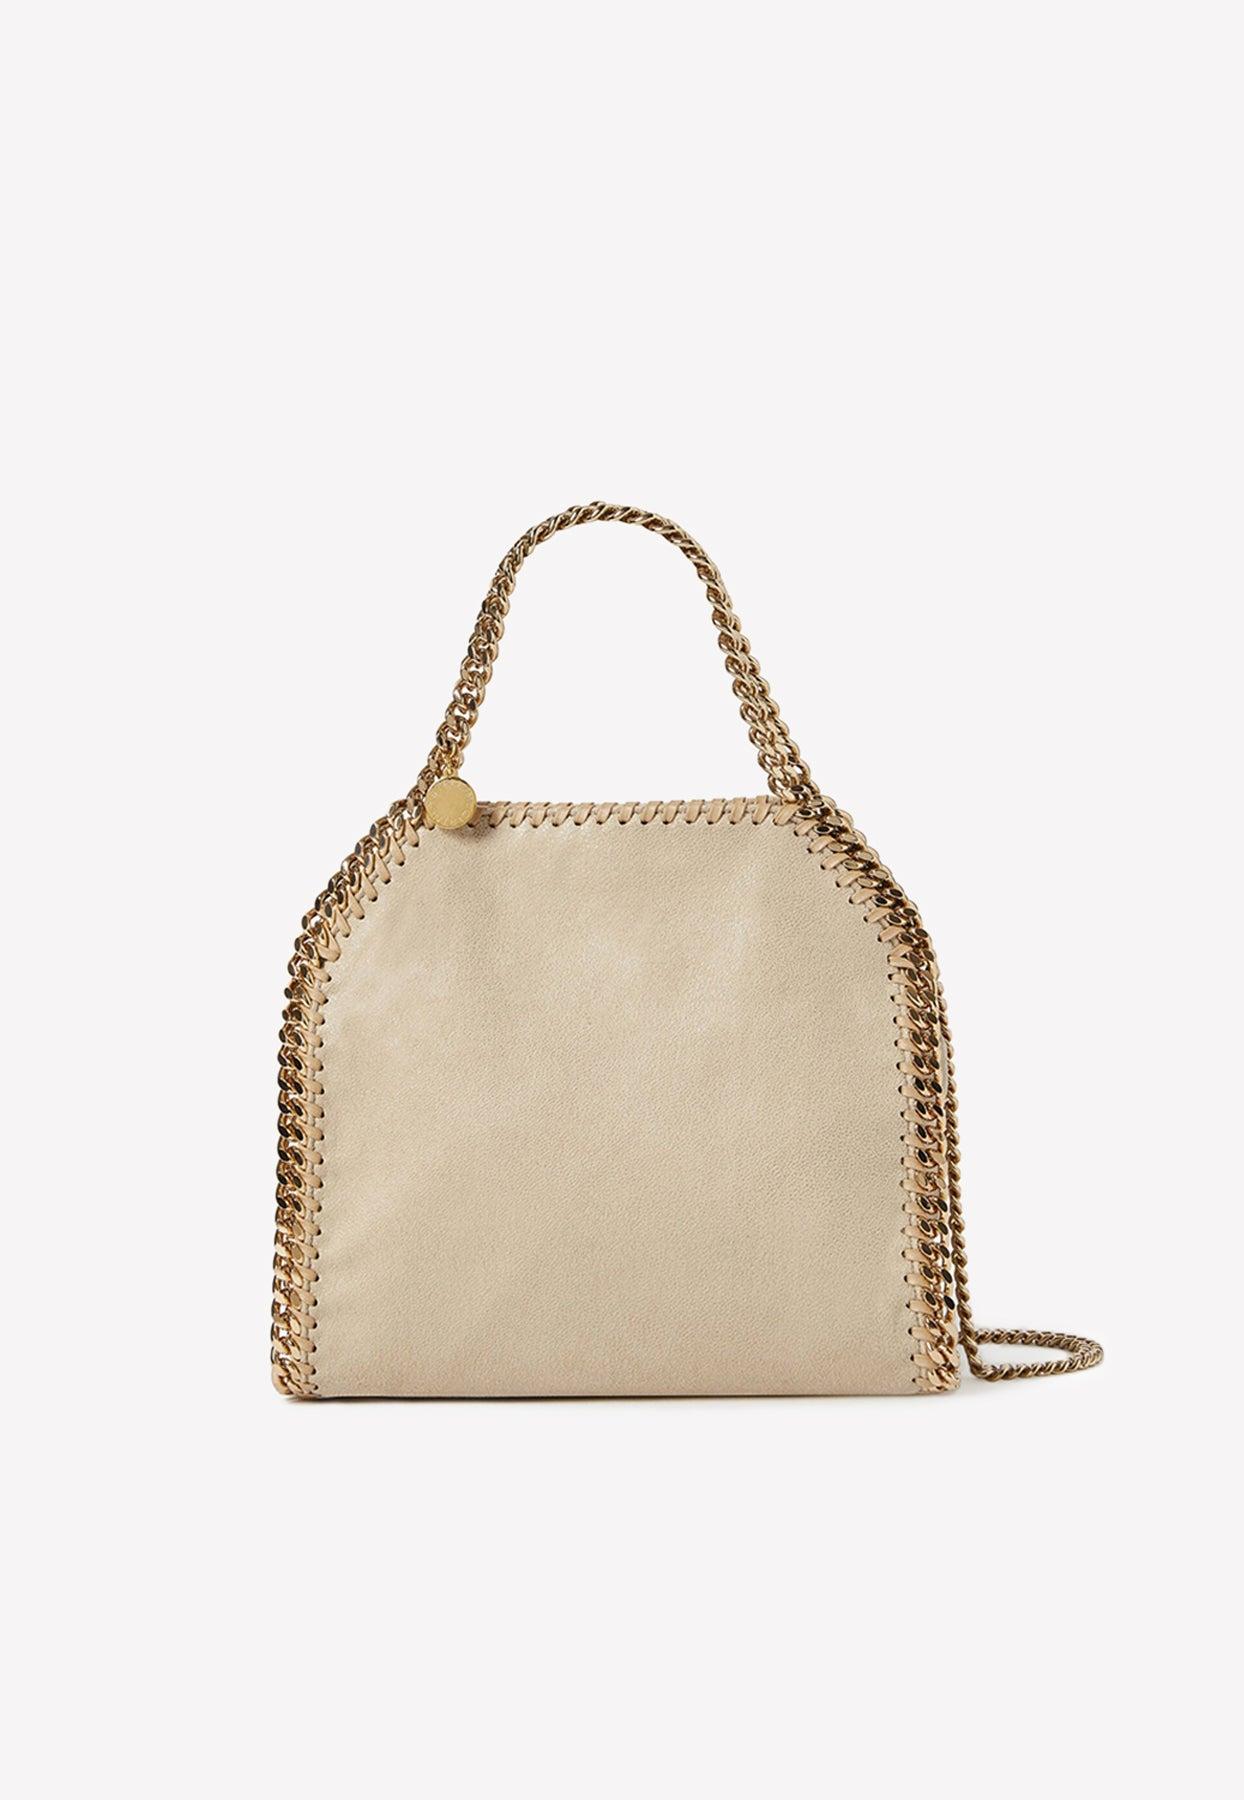 Stella McCartney Beige Shaggy Deer Faux-Leather Falabella Small Tote Bag